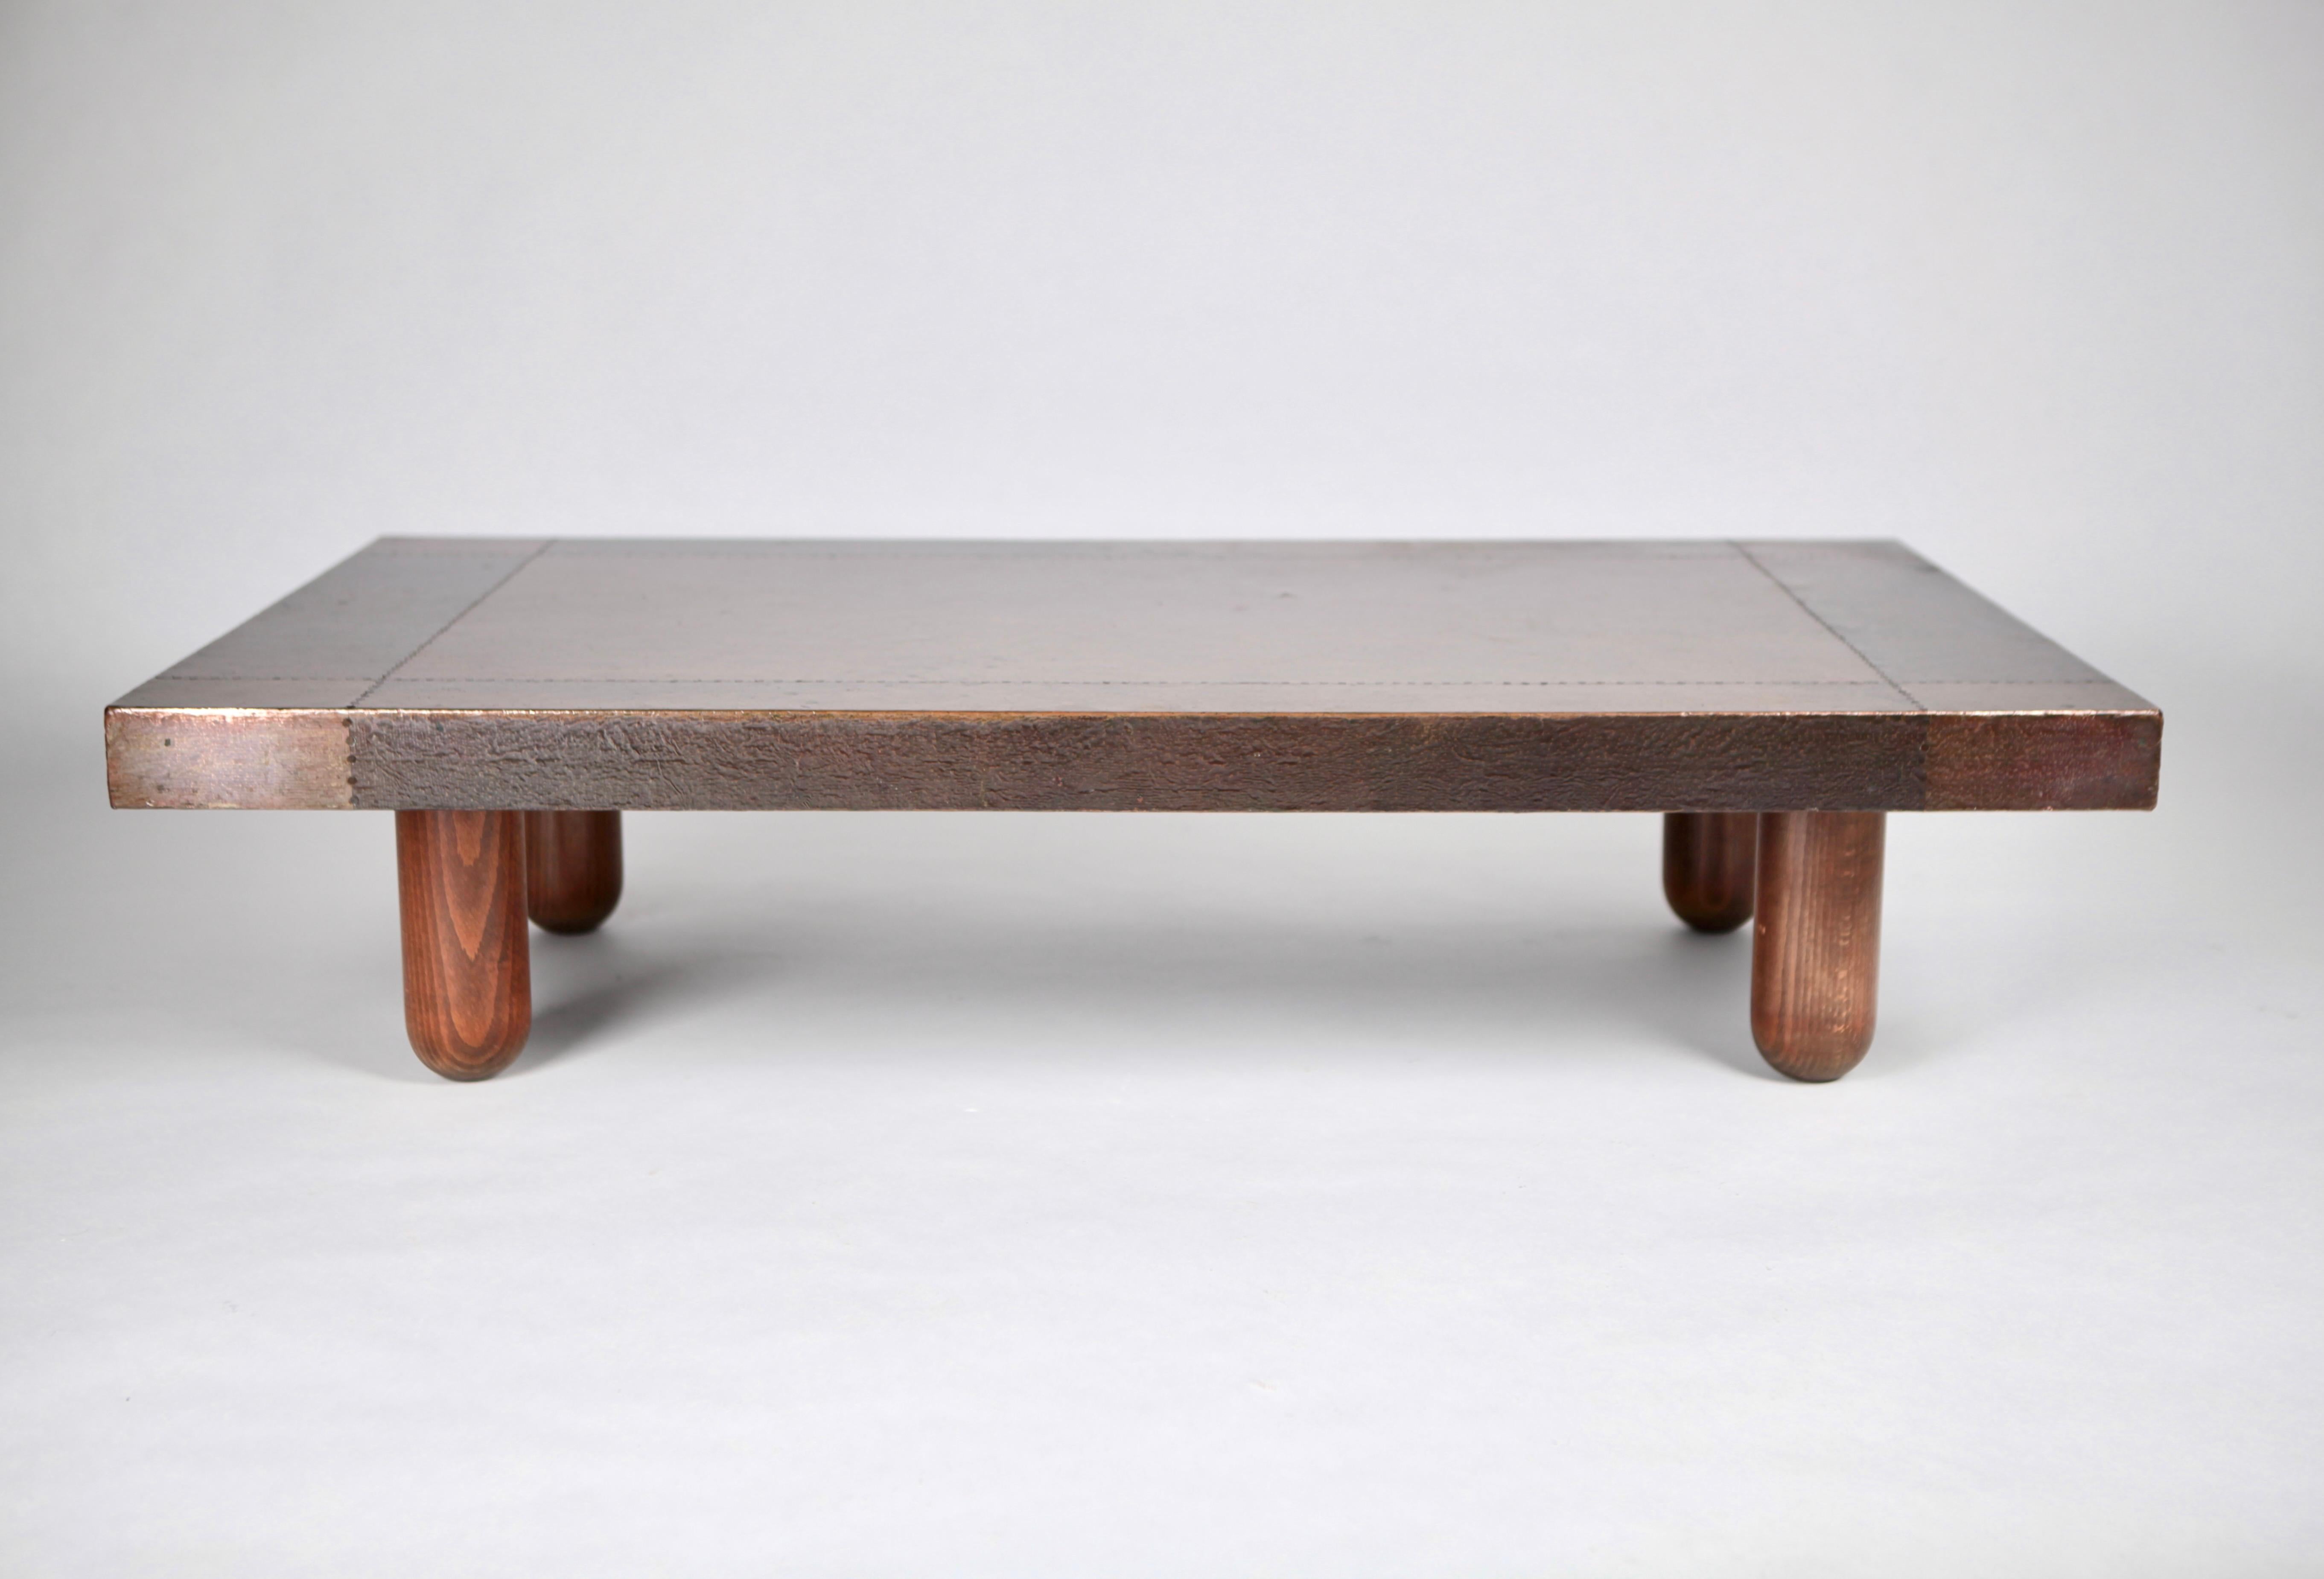 This outstanding and unique coffee-table by Italian designer & sculptor Lorenzo Burchiellaro (1933-) is a real catching anchor piece. It is executed in copper with nail trimming & stained oak legs.
The copper surface with a fantastic